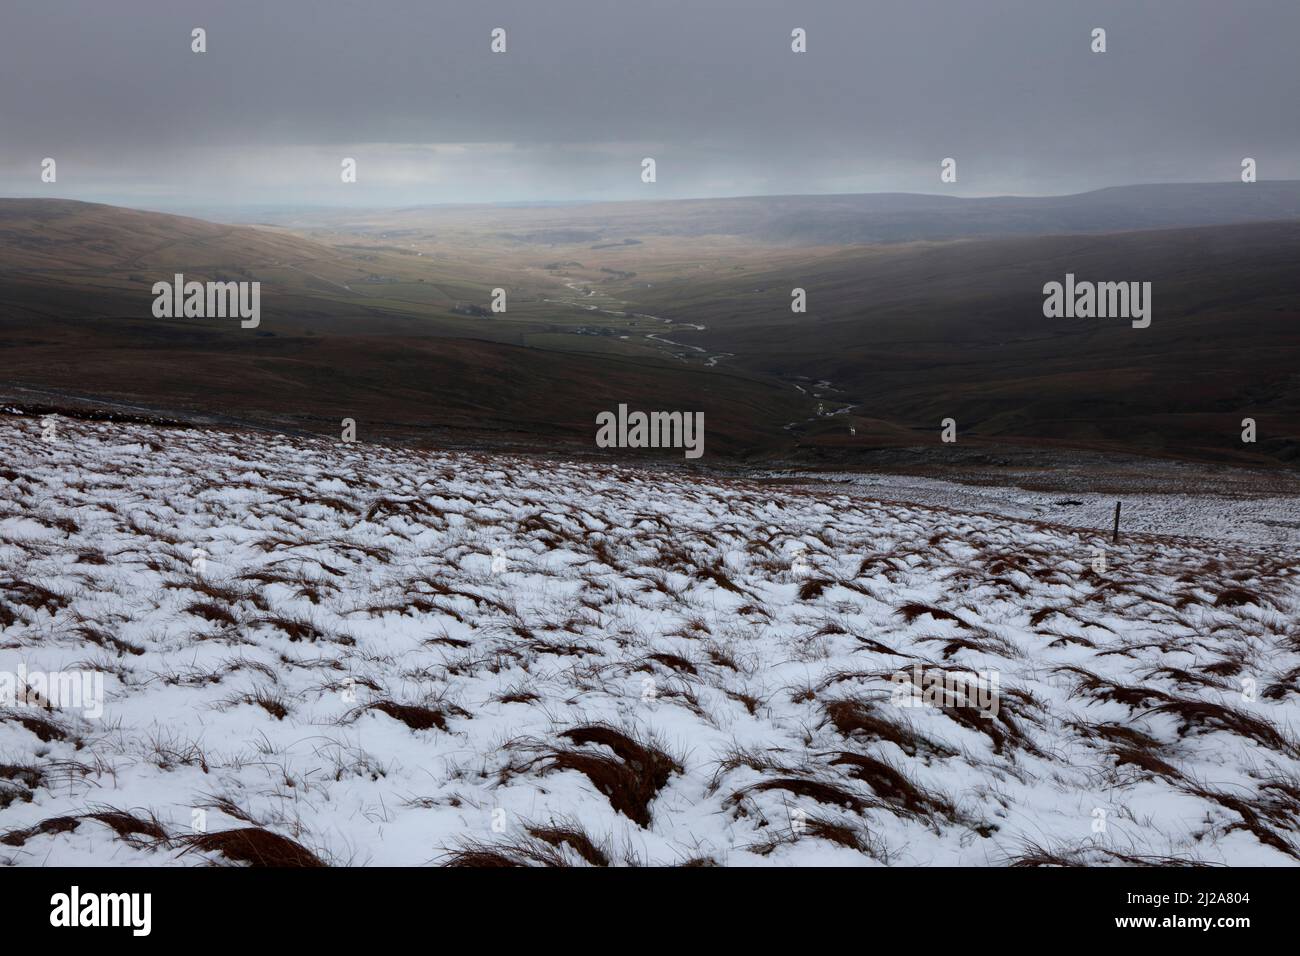 Looking towards Harwood Beck from Harwood Common, Upper Teesdale, County Durham, England, UK Stock Photo